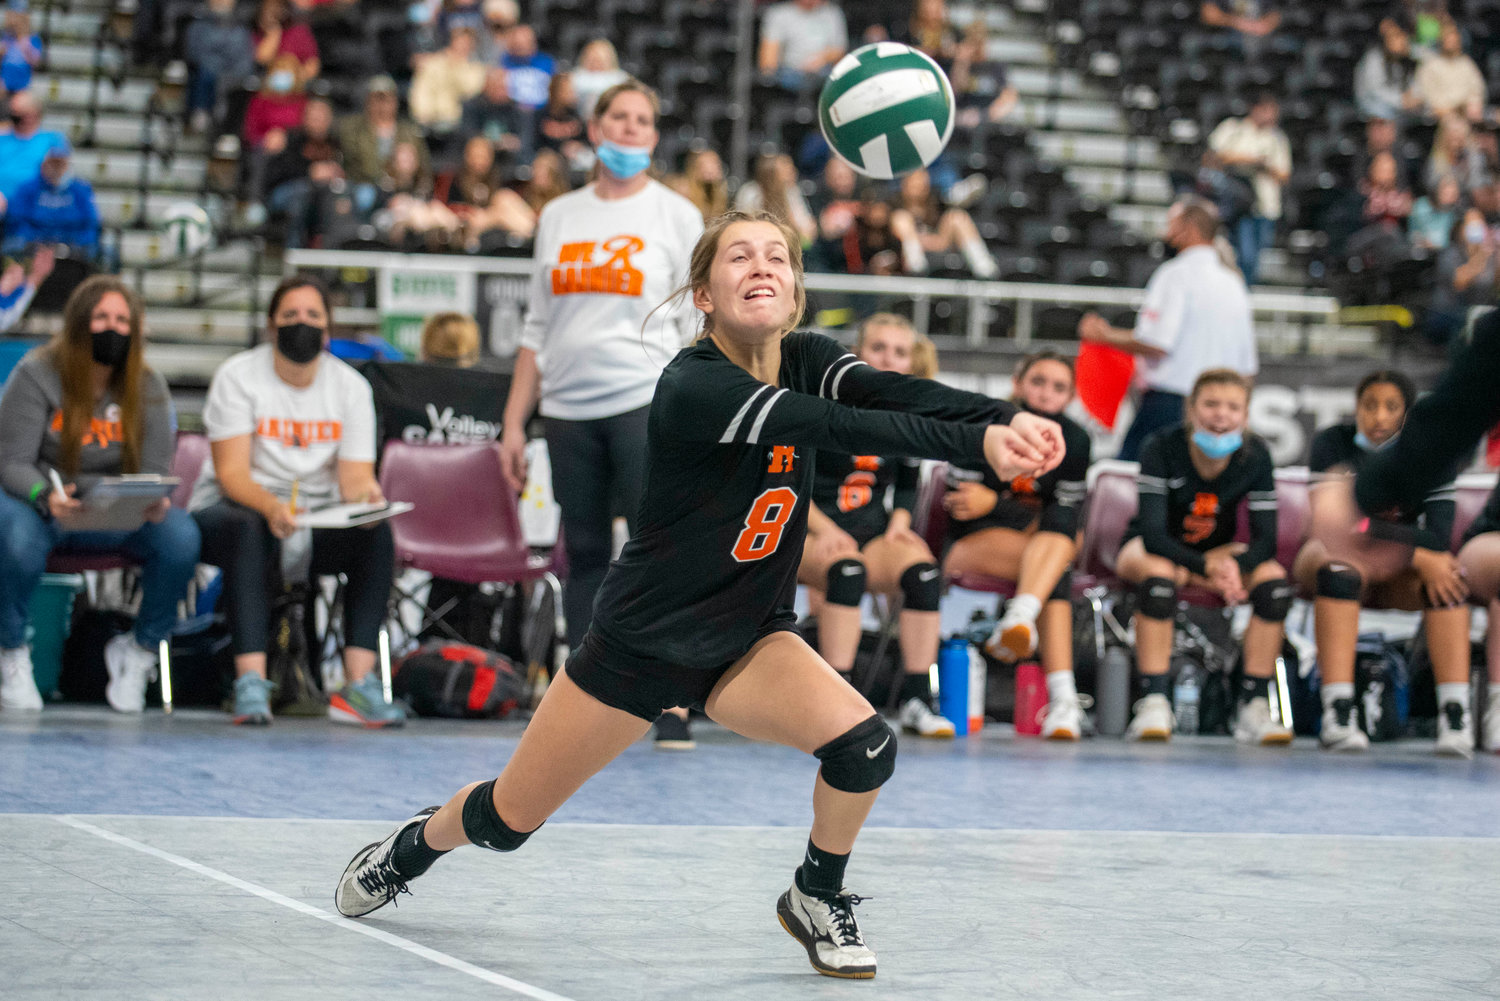 Rainier’s Olivia Earsley hustles for a La Conner spike during the state tournament Thursday in Yakima.